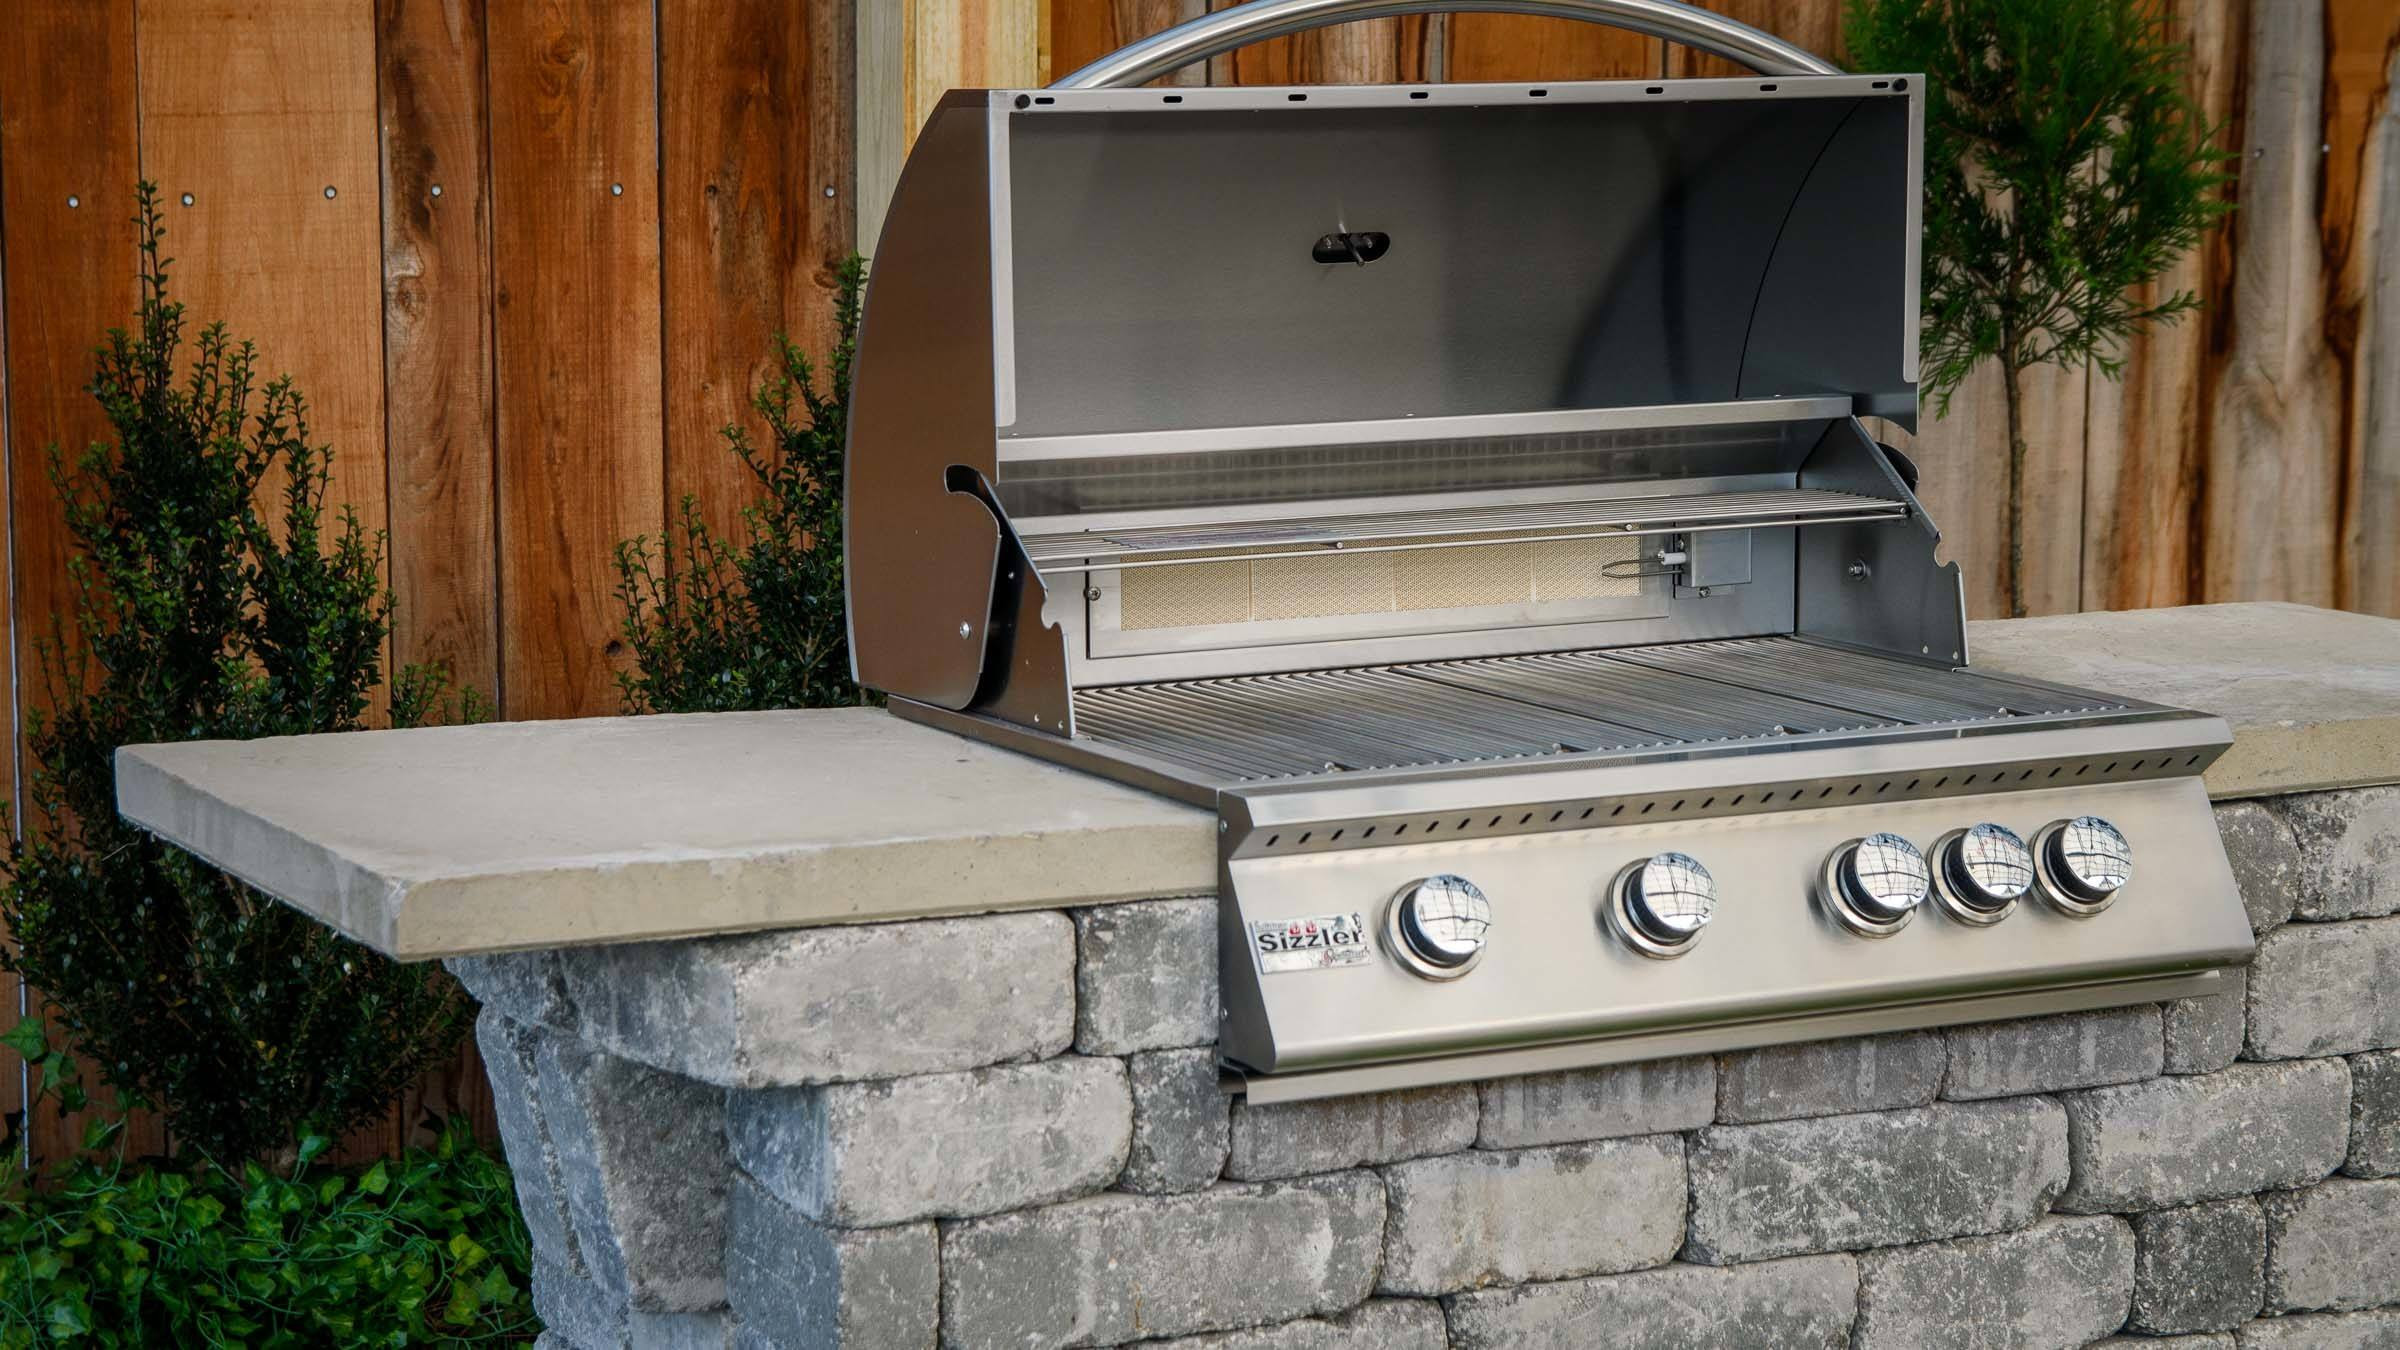 DIY Outdoor Grill Island
 Willard Grill Island Jealousy inducing grills without